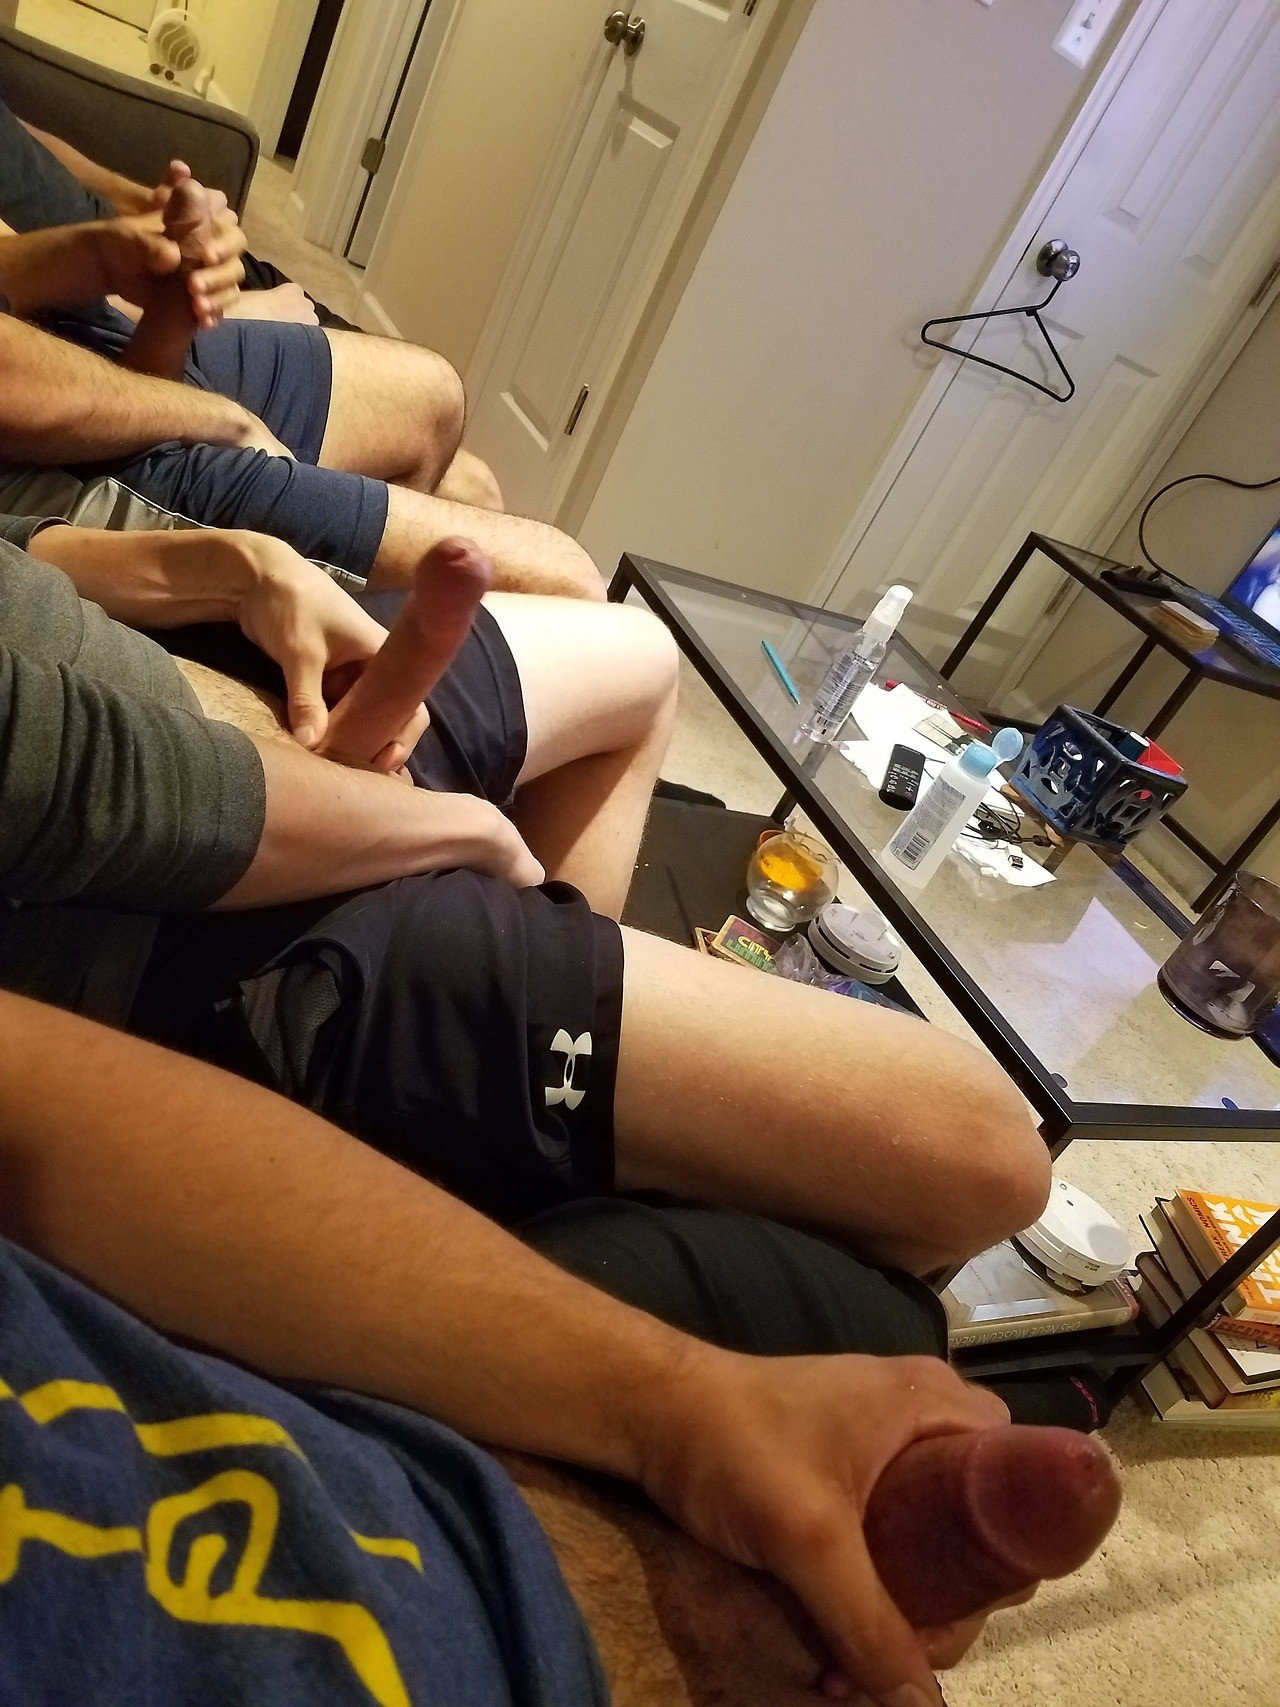 Watch the Photo by queerfever with the username @queerfever, who is a brand user, posted on December 18, 2018. The post is about the topic wankbuddies. and the text says 'A night with the boys

#jerkingoff #batebuddy #buddybate #masturbation #jerkoff #cocks'